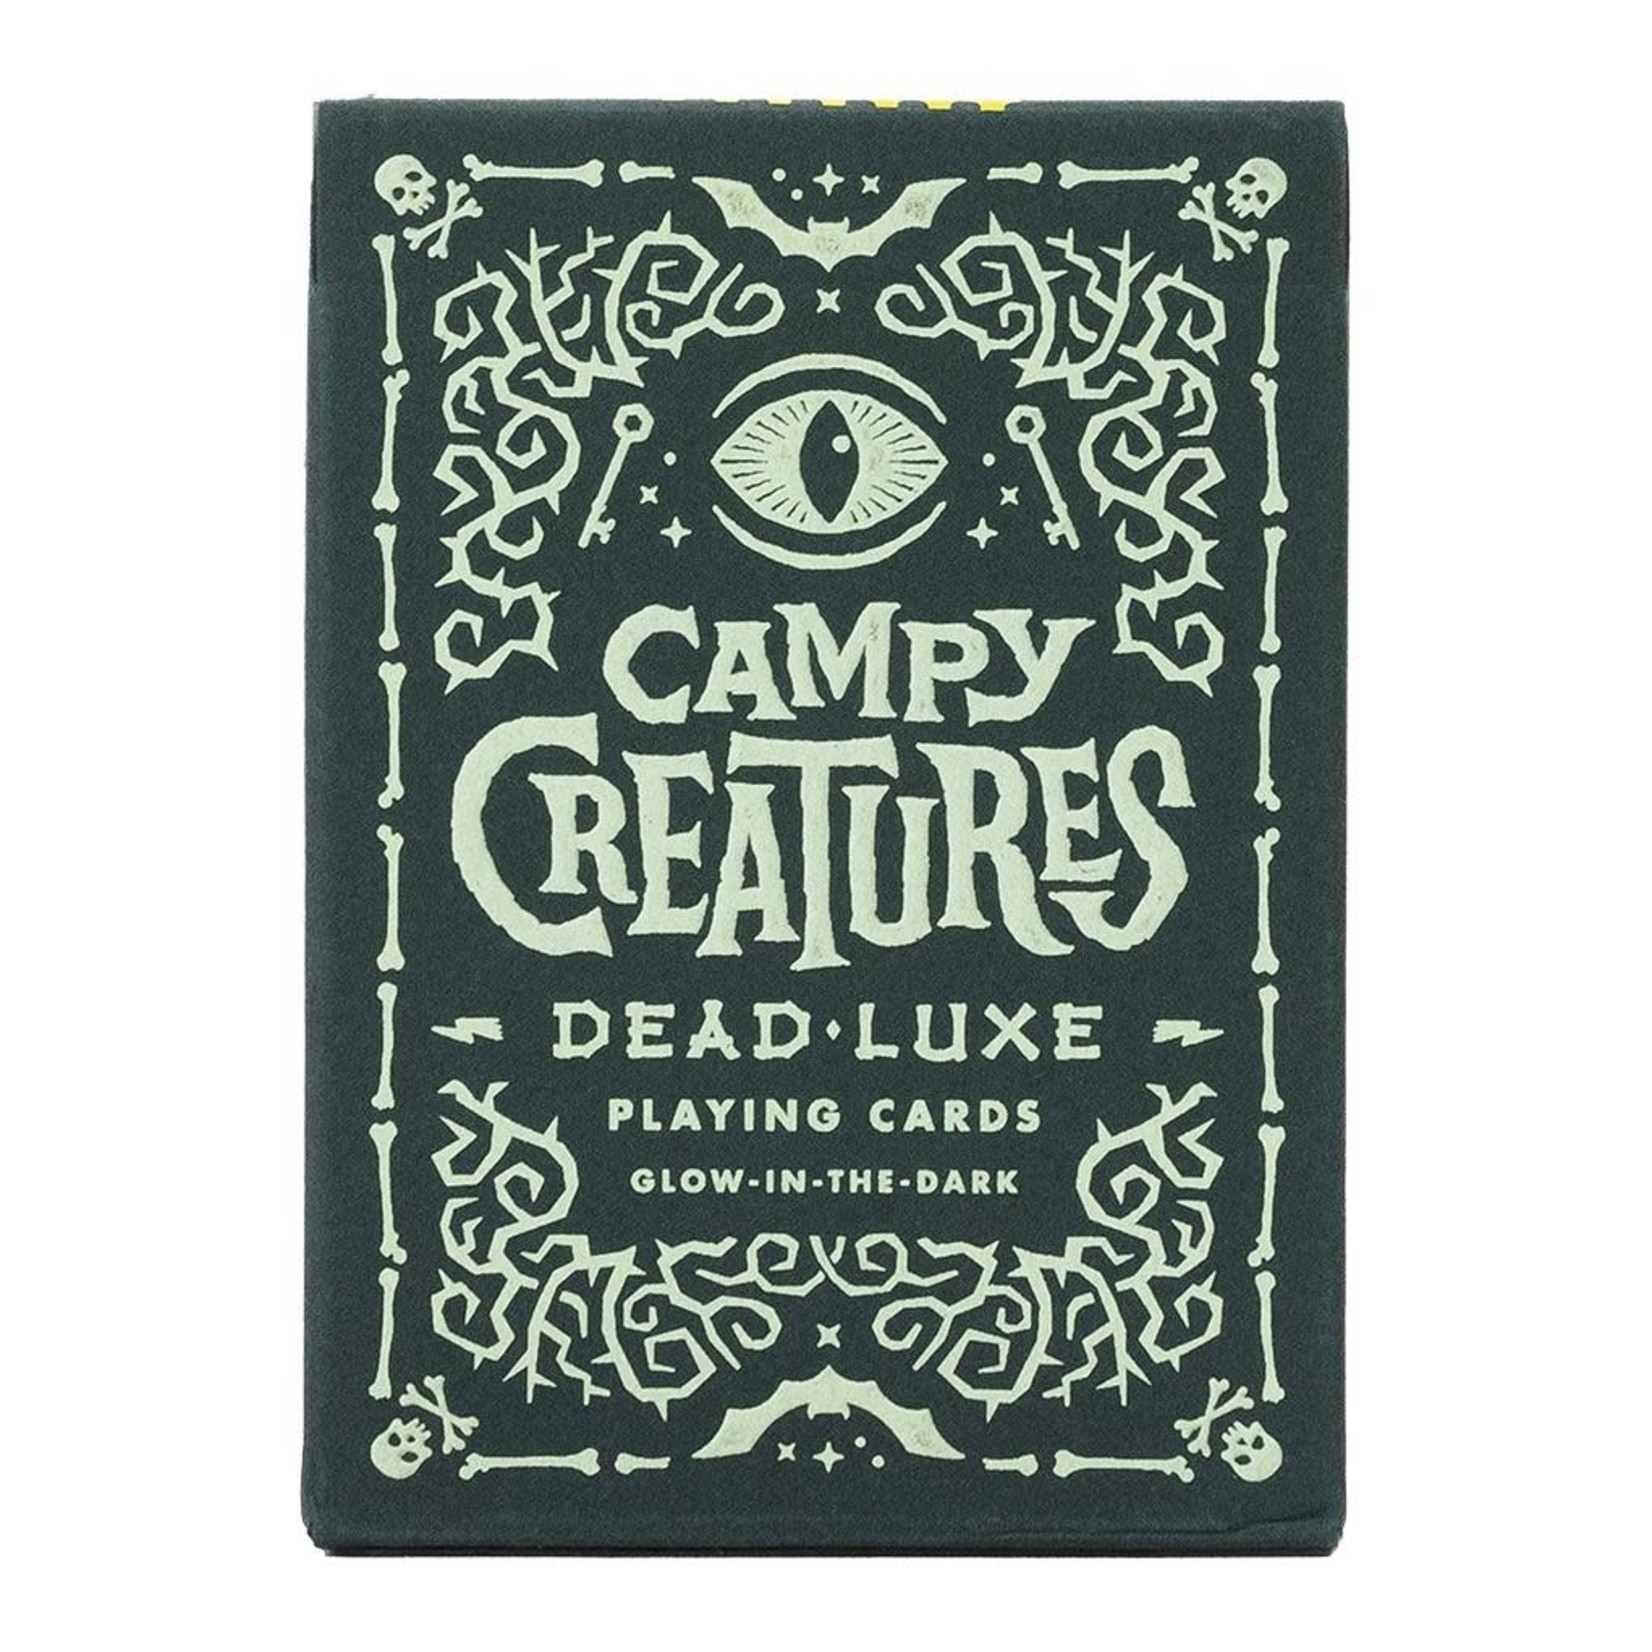 Campy Creatures: Dead-Luxe Playing Cards